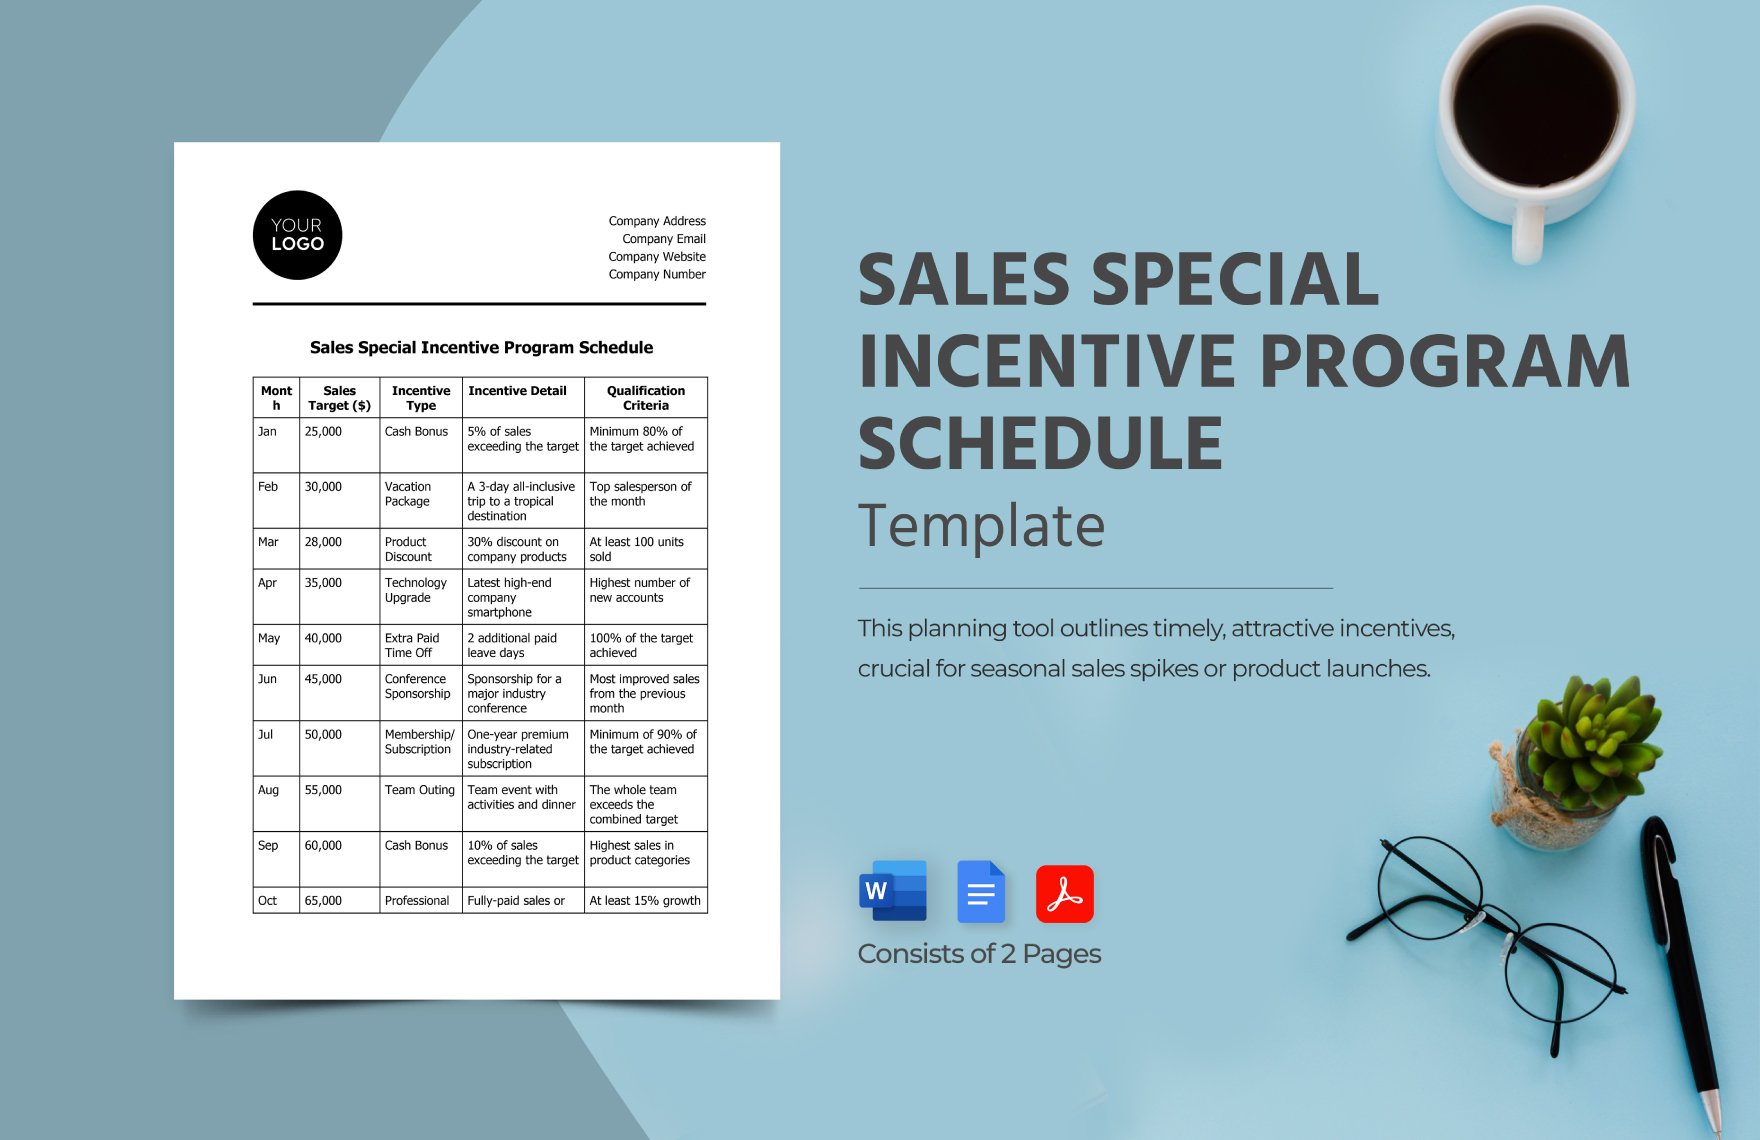 Sales Special Incentive Program Schedule Template in Word, Google Docs, PDF